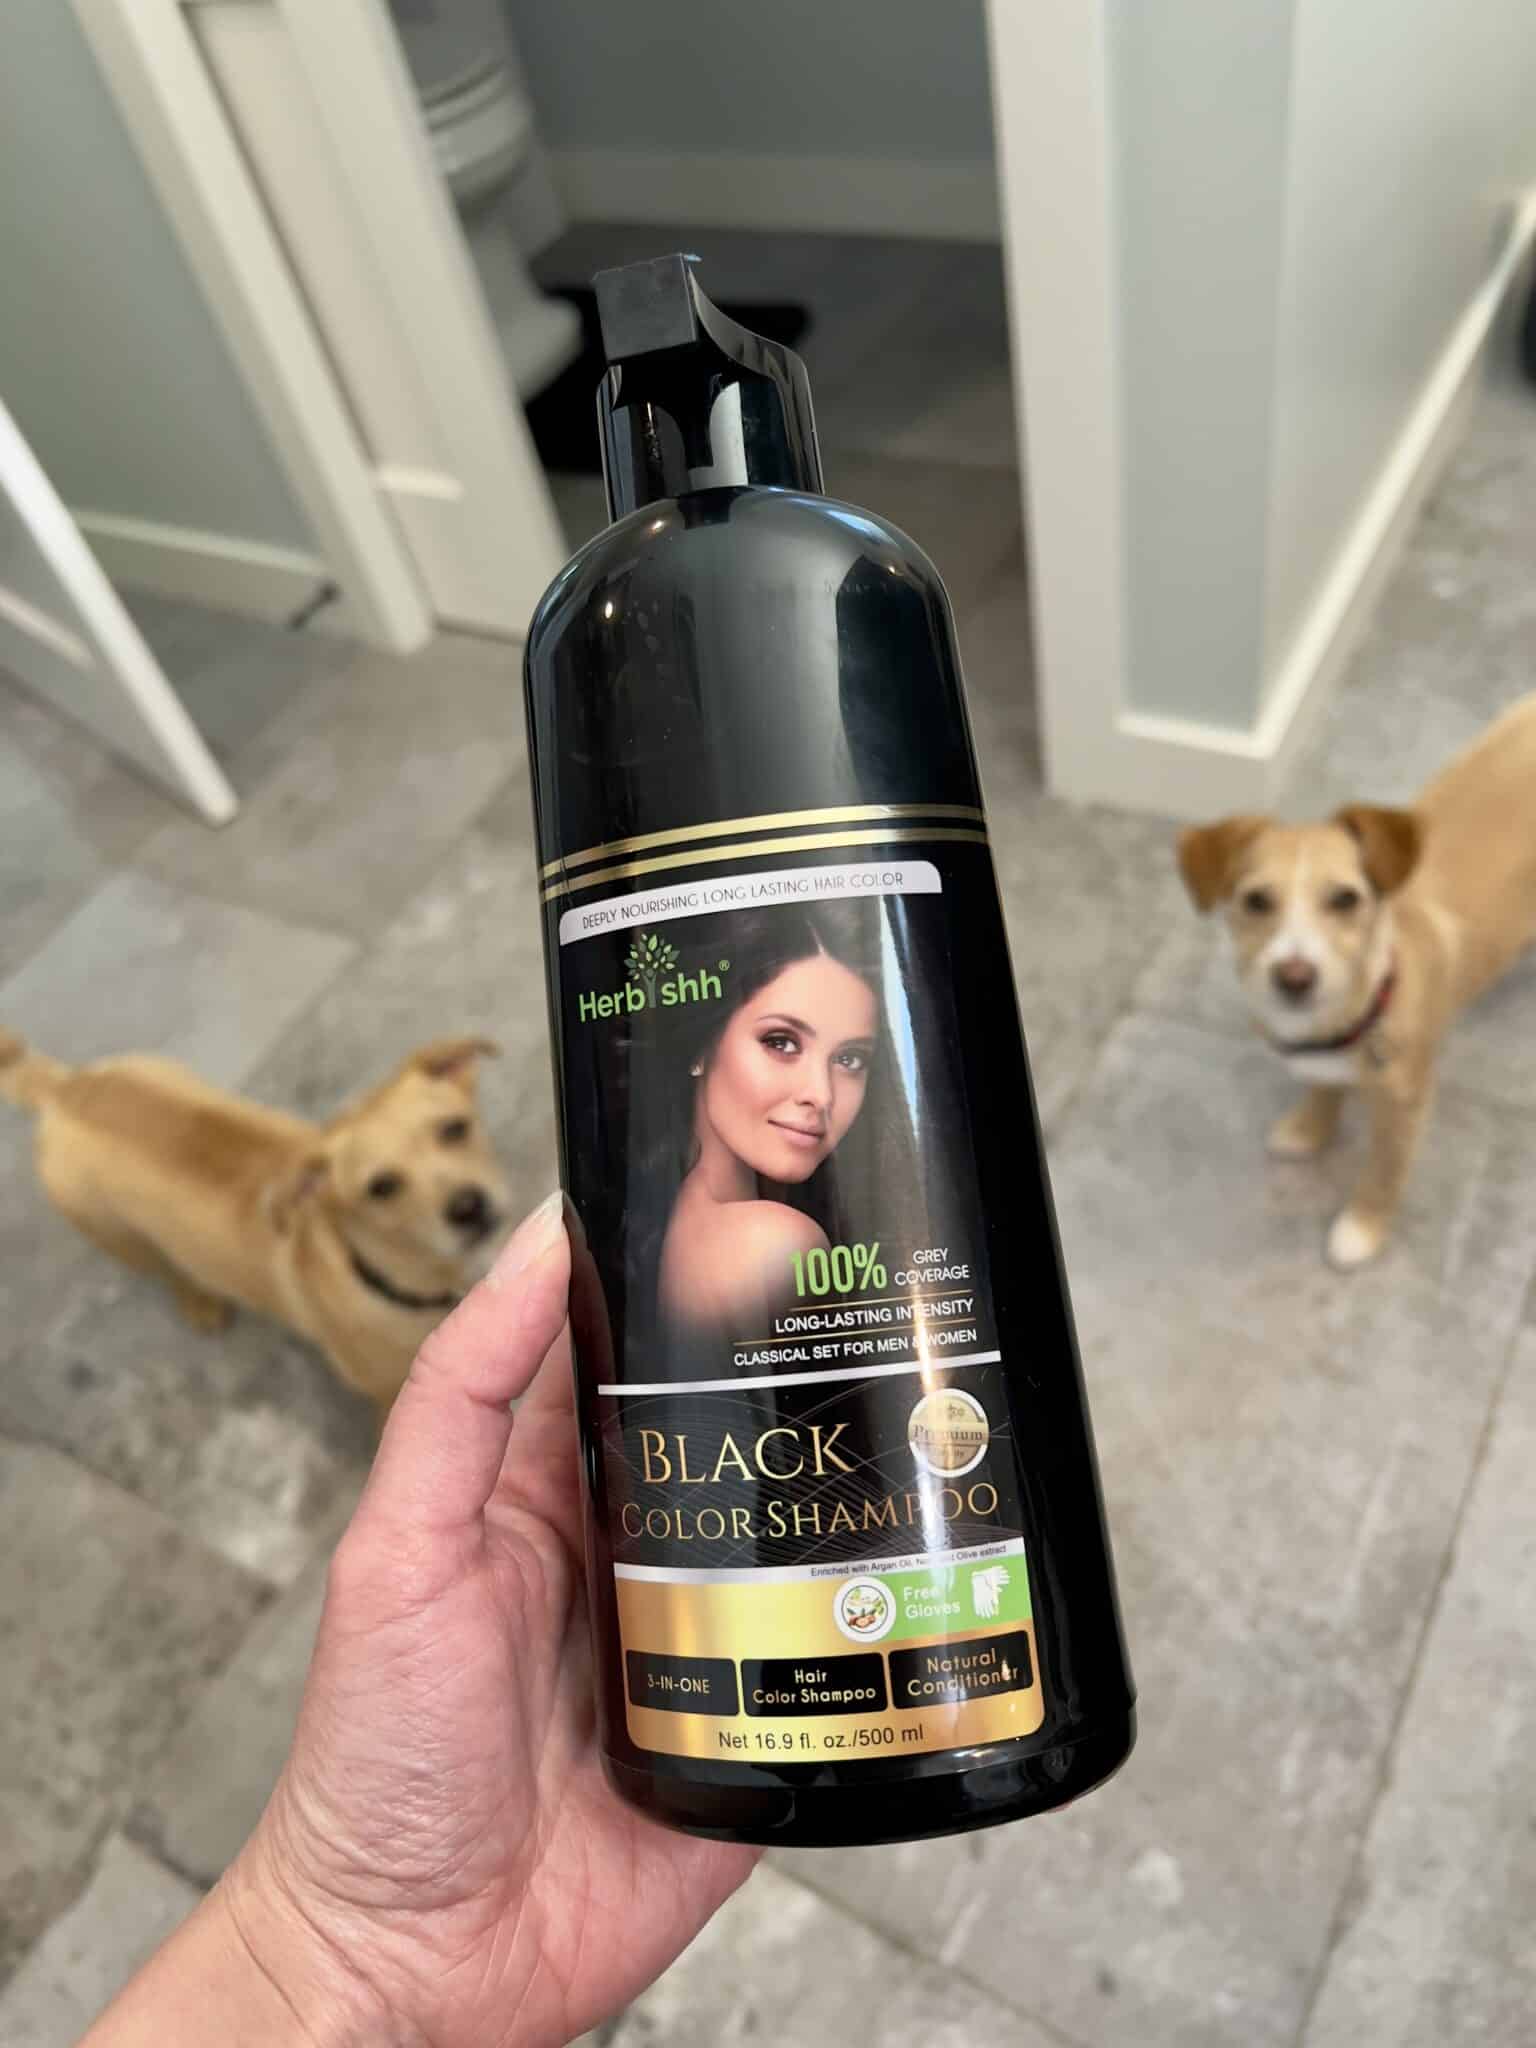 The Herbishh Color Shampoo in Black bottle with Lindsey's two dogs in the background looking up at it